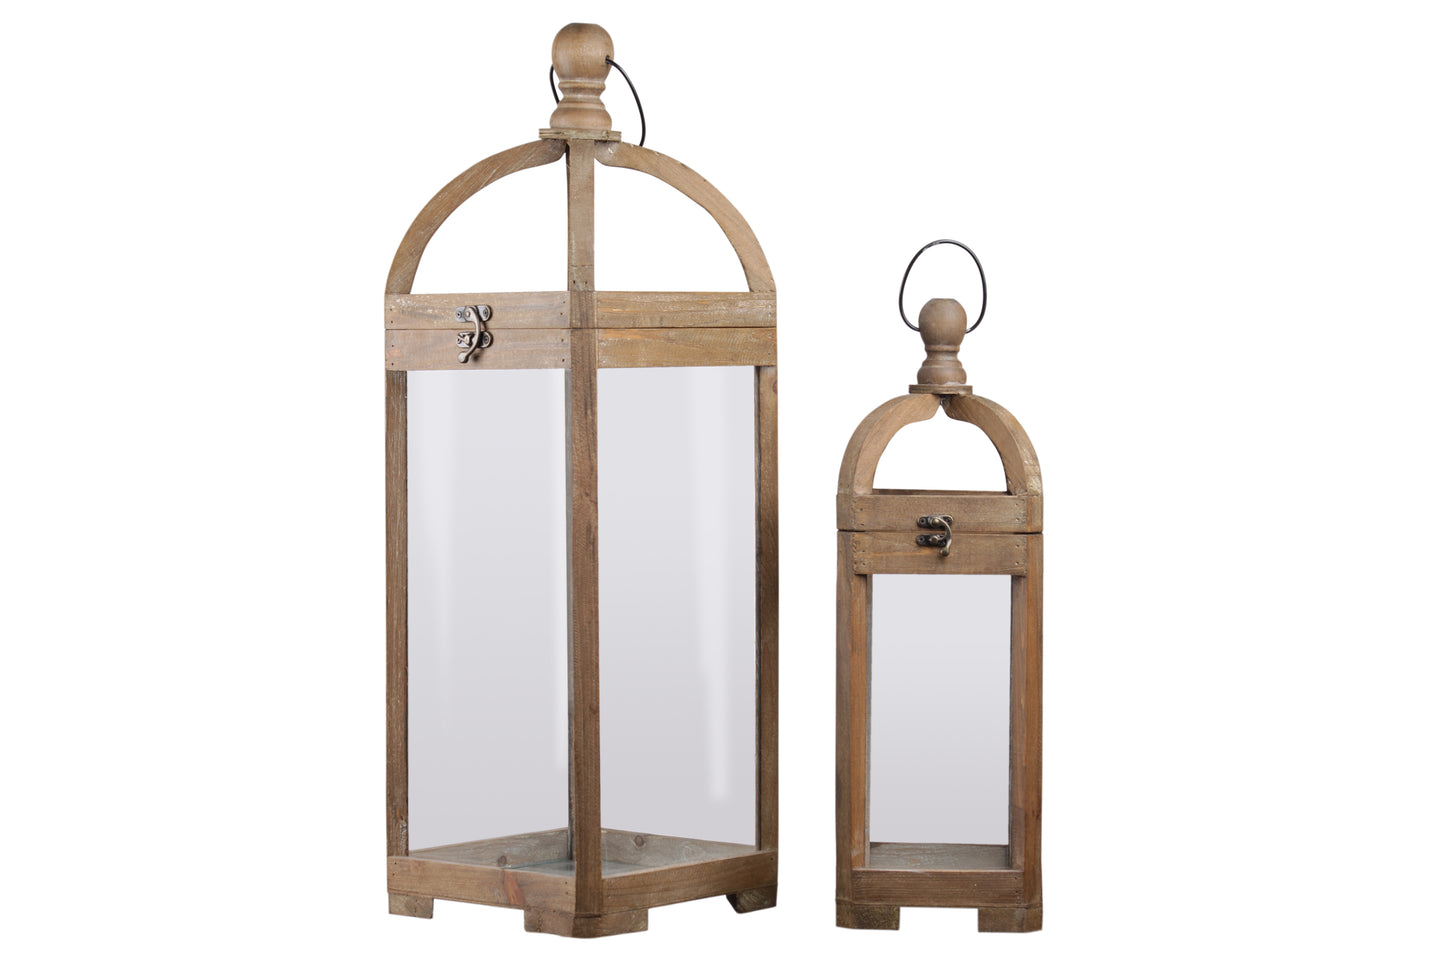 Wood Square Lantern with Finial Top, Ring Handle and Glass Windows